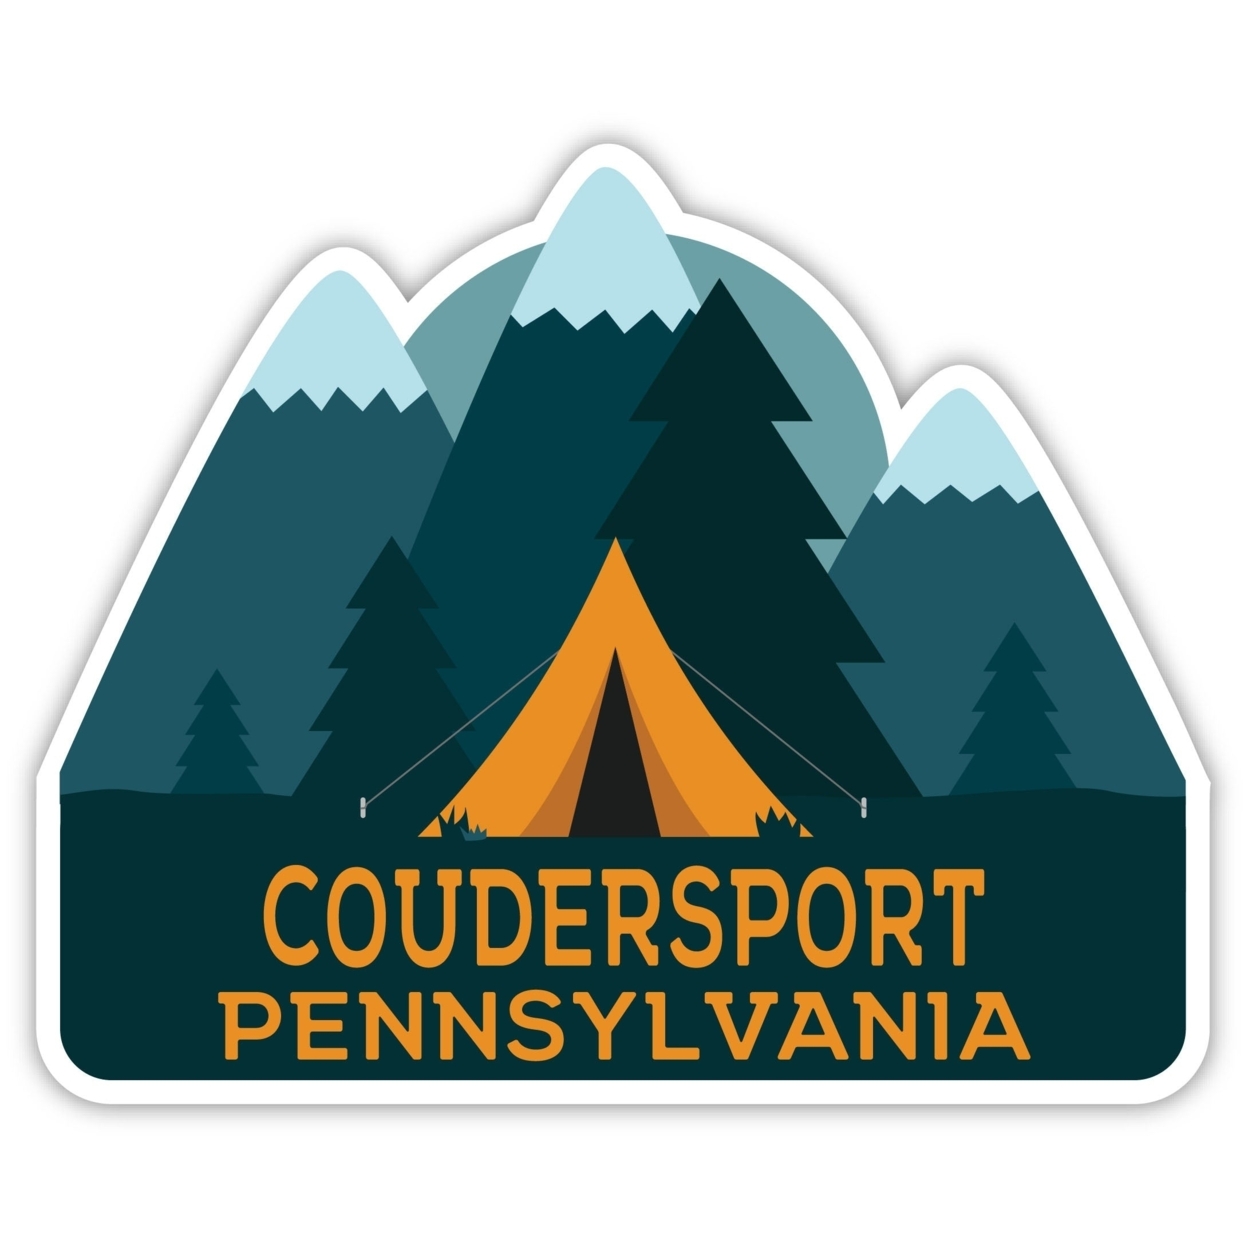 Coudersport Pennsylvania Souvenir Decorative Stickers (Choose Theme And Size) - Single Unit, 6-Inch, Great Outdoors